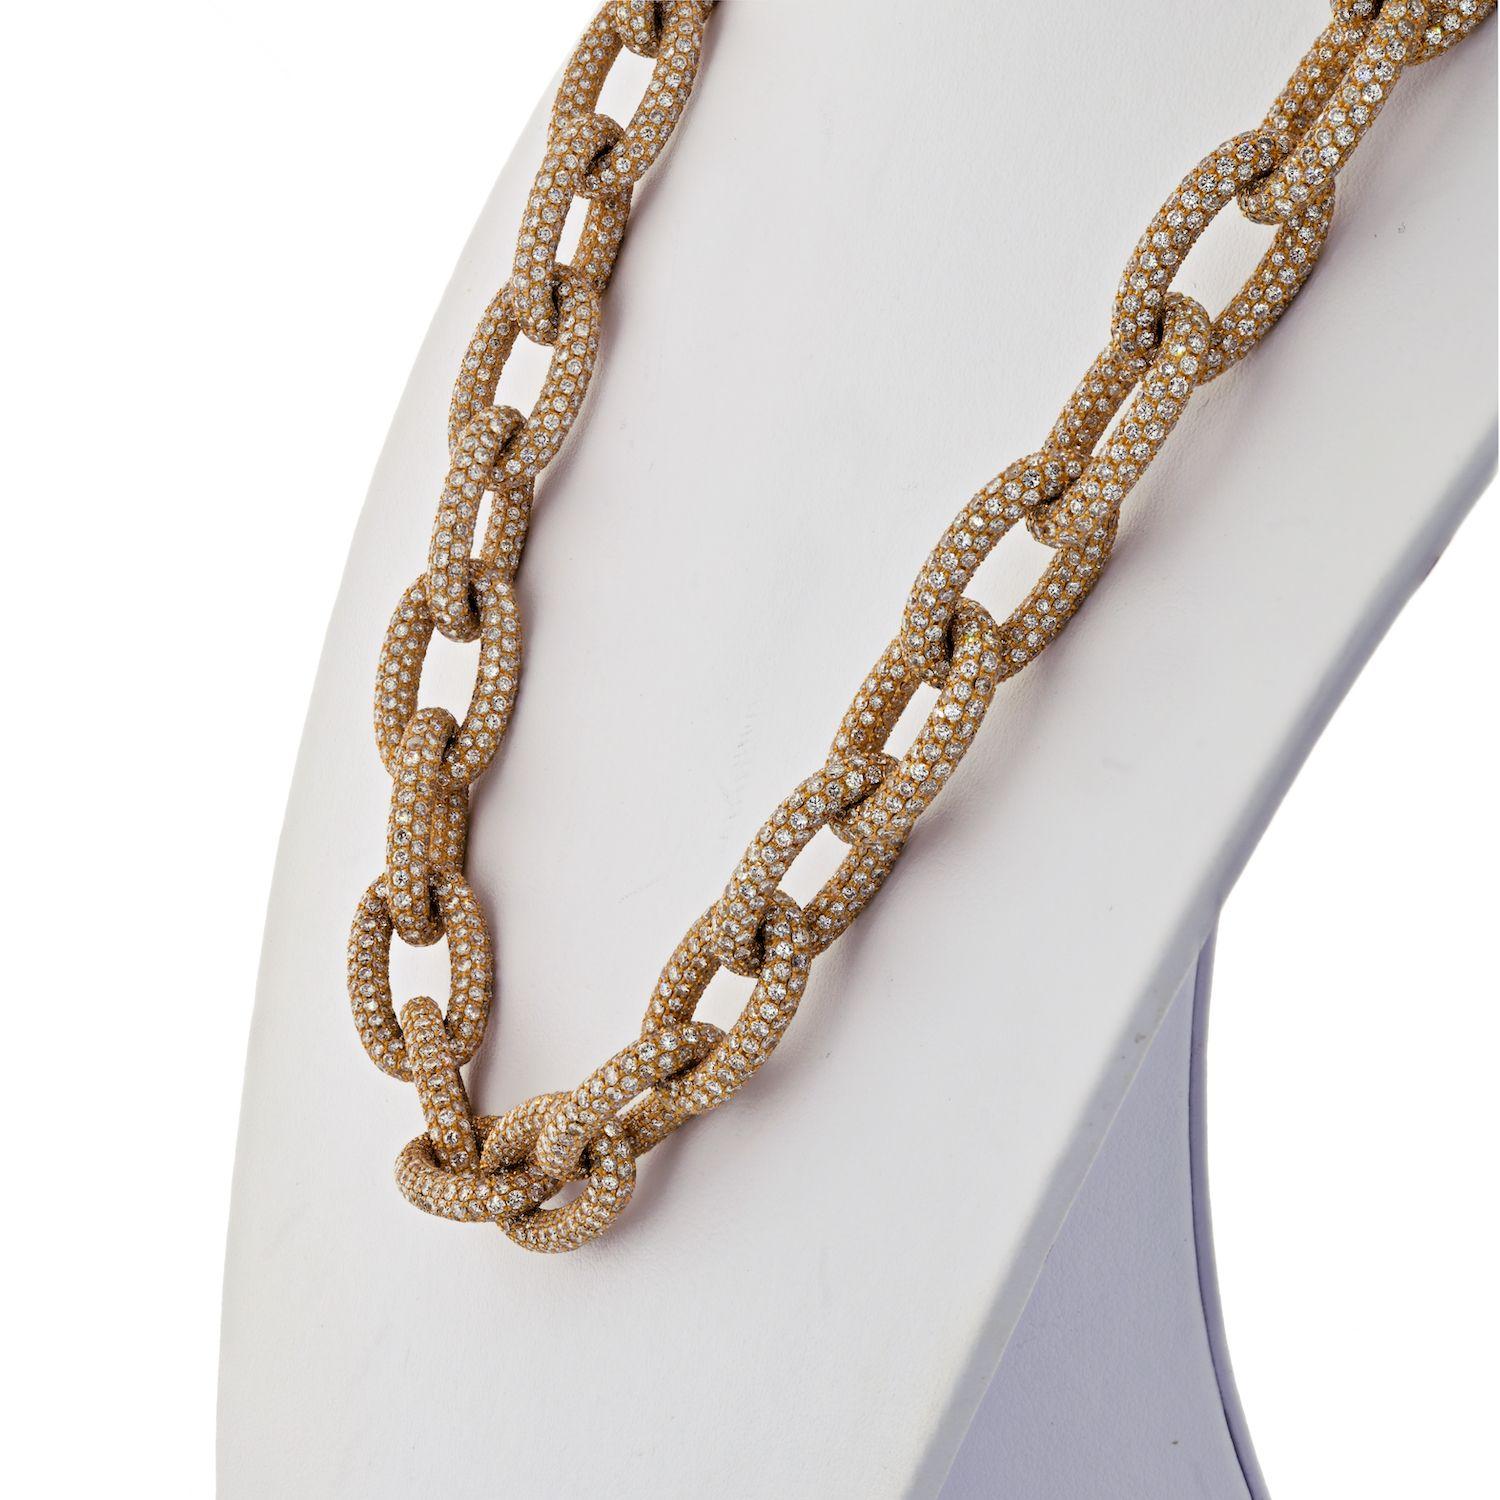 A study in tradition without being traditional, this diamond link chain necklace blends high fashion and streetwear verve. All links are detailed with round-cut diamonds. 
22 inches. 
Carat Weight 90.00cttw
Quality: G-H color, VS-SI clarity on